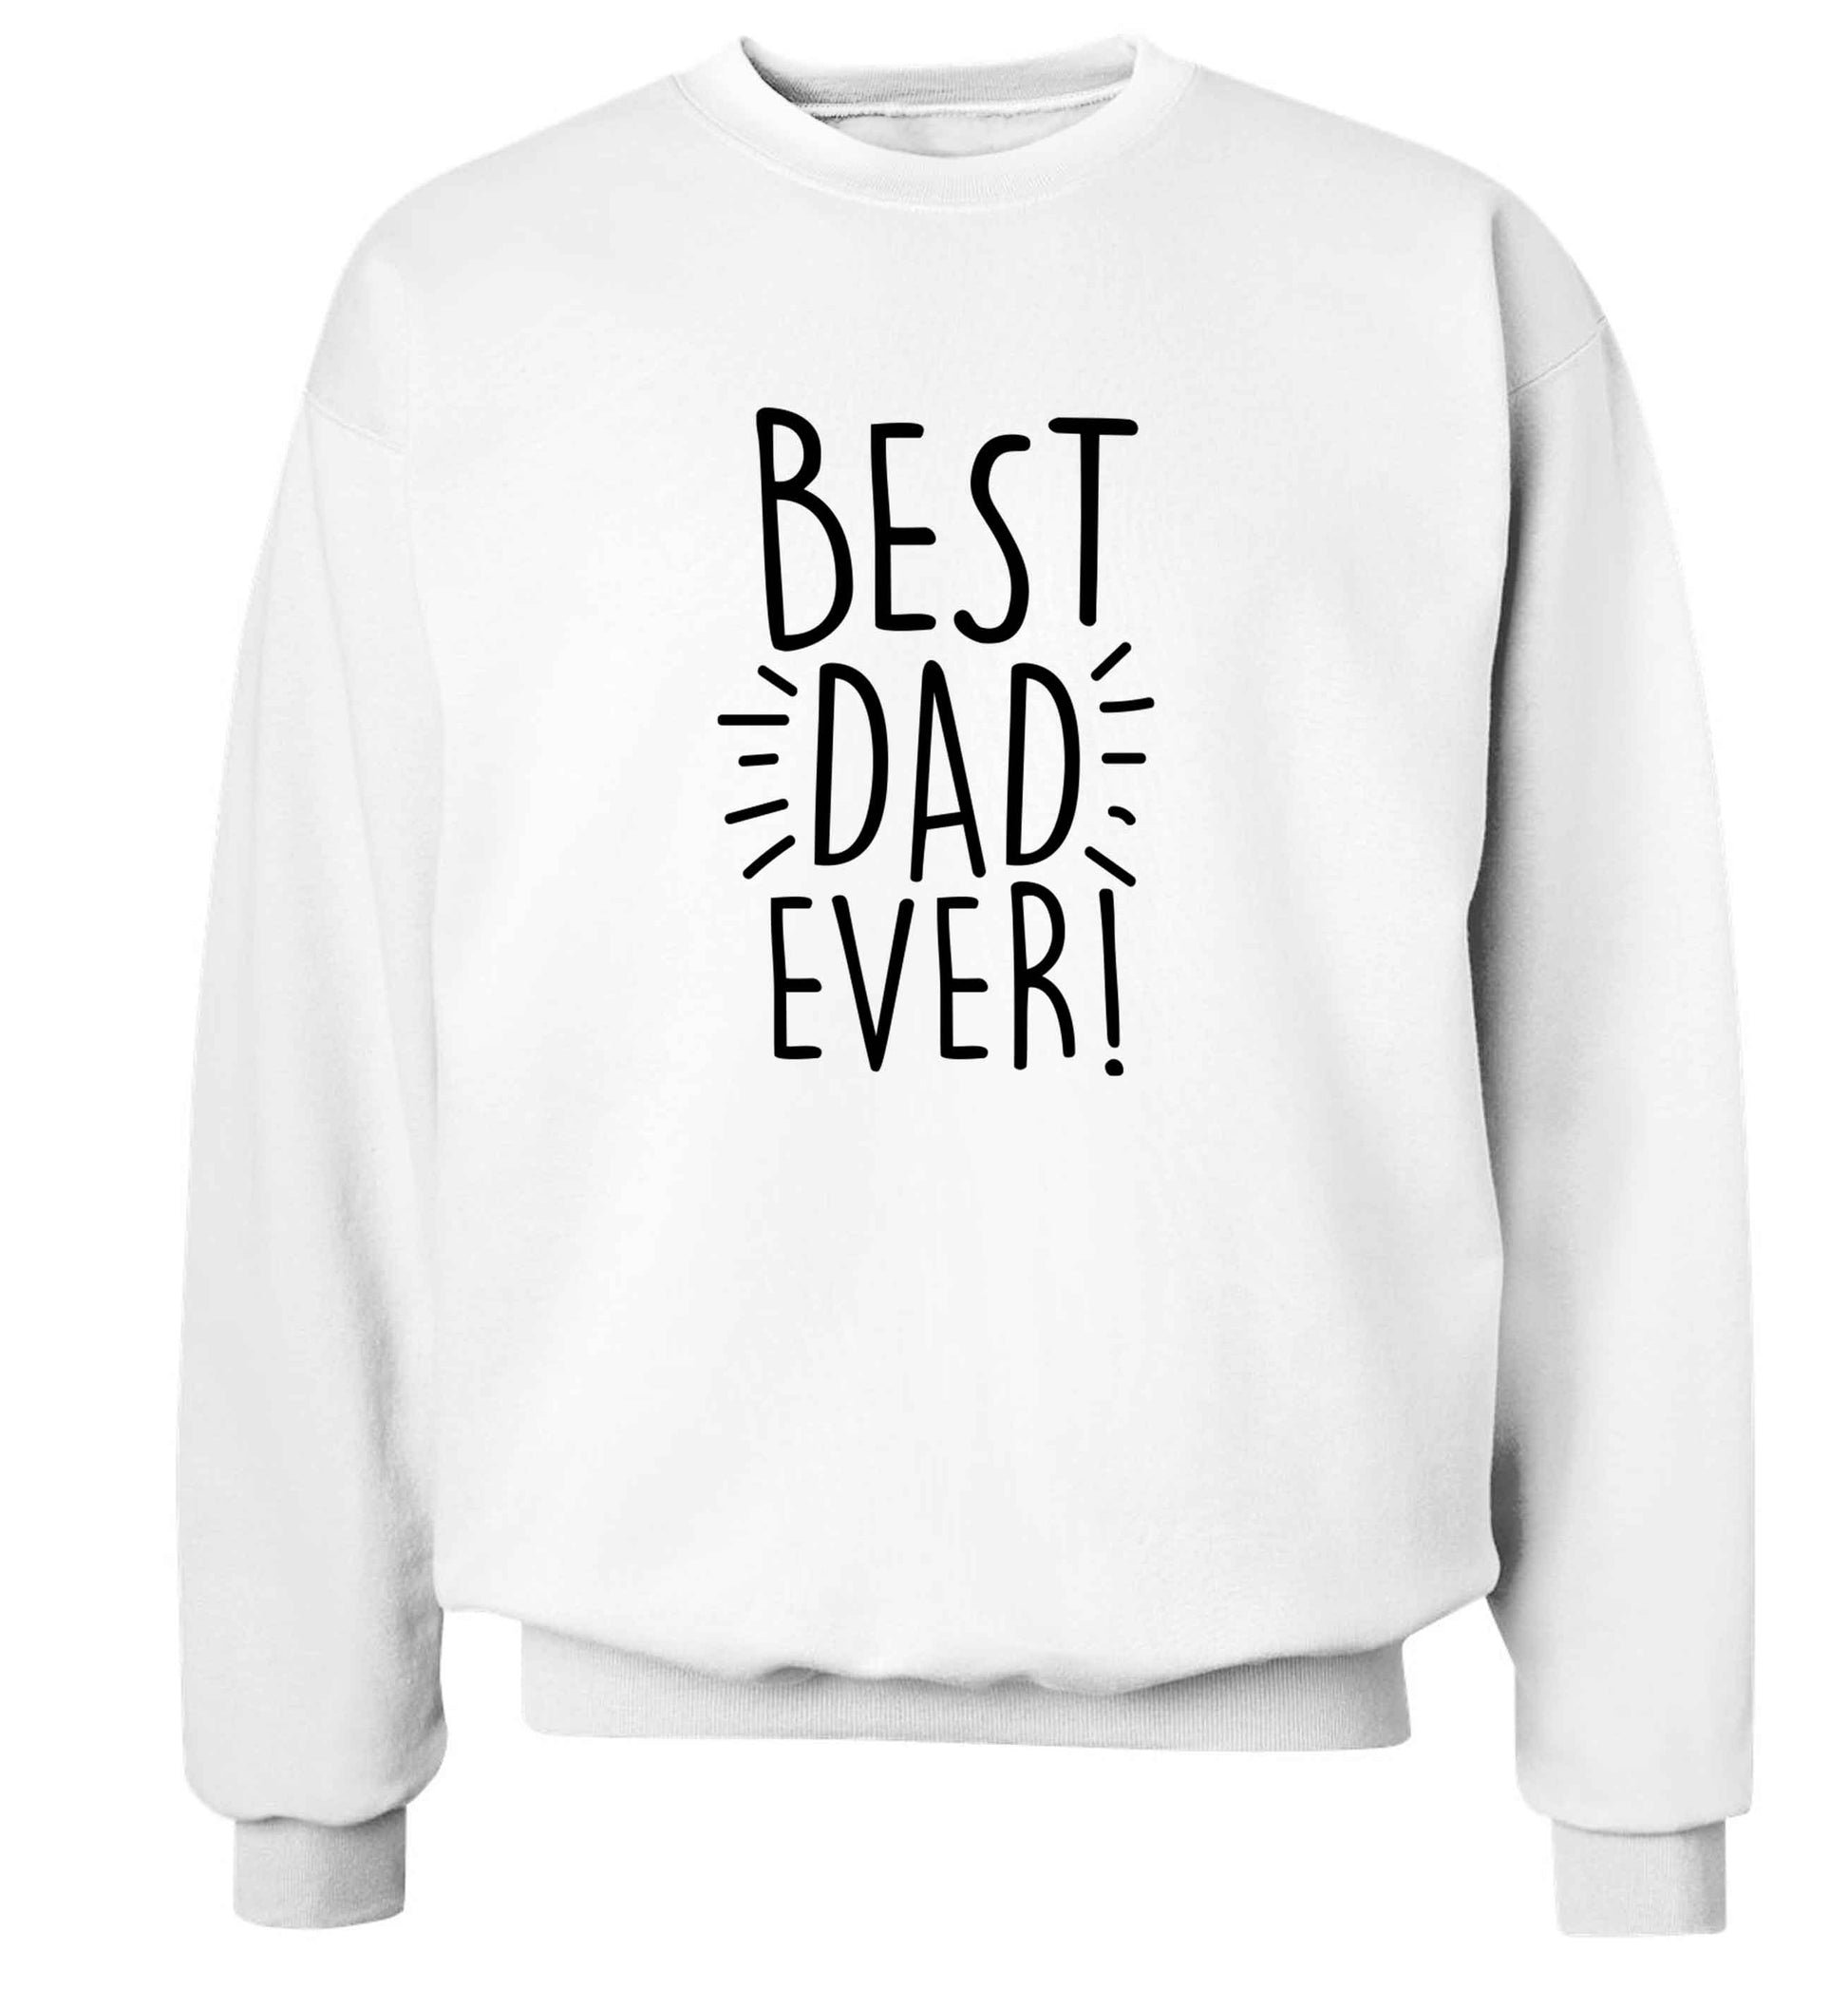 Best dad ever! adult's unisex white sweater 2XL